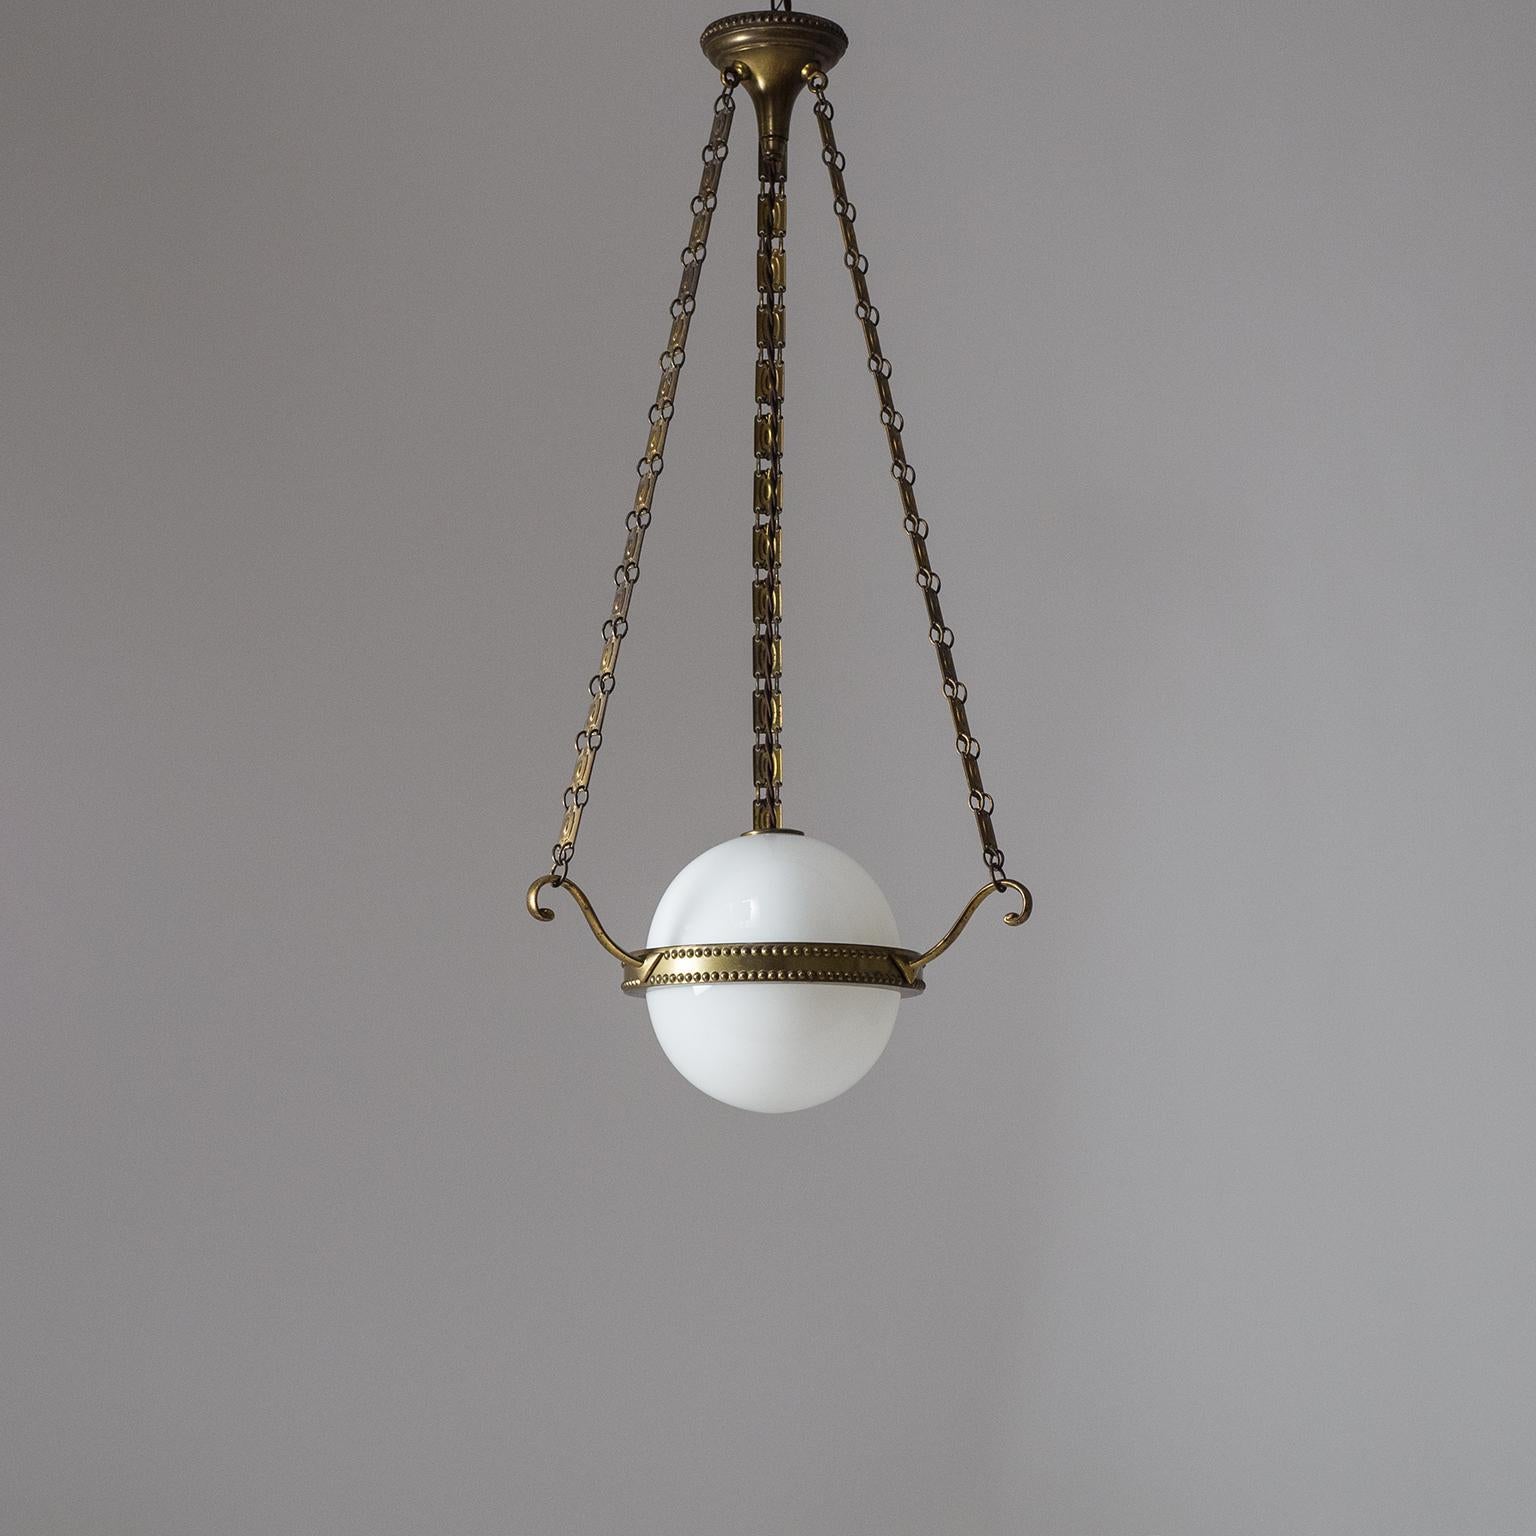 Early Art Deco Pendant, circa 1910, Brass and Glass 14